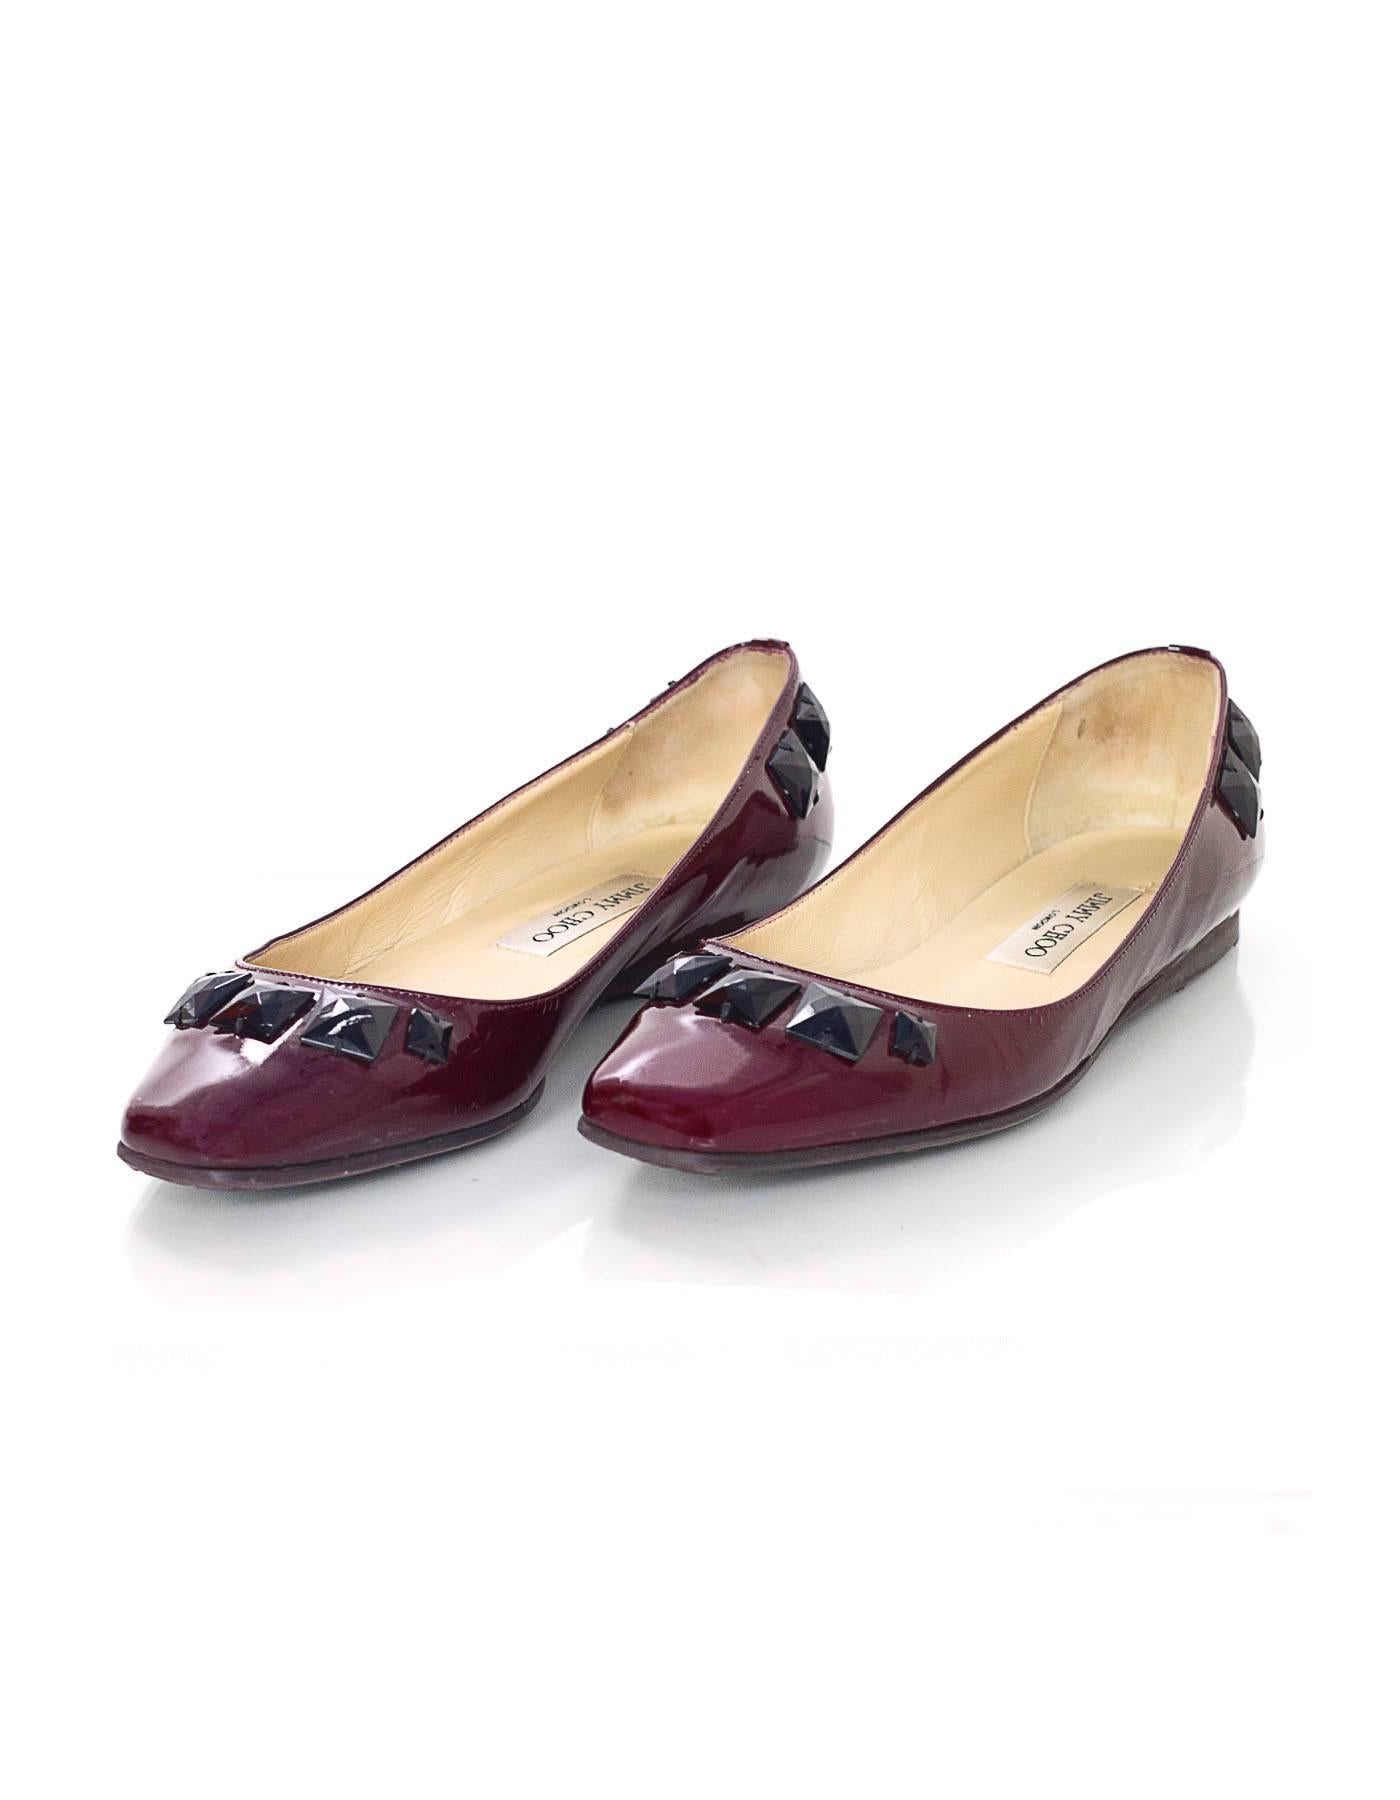 100% Authentic Jimmy Choo Burgundy Flats With Studs. Features burgundy patent leather flats feature black studs, a square toe and rubber sole. Silver Jimmy Choo nameplate on the back heel of the shoe.

Made In: Italy
Color: Burgundy
Materials: